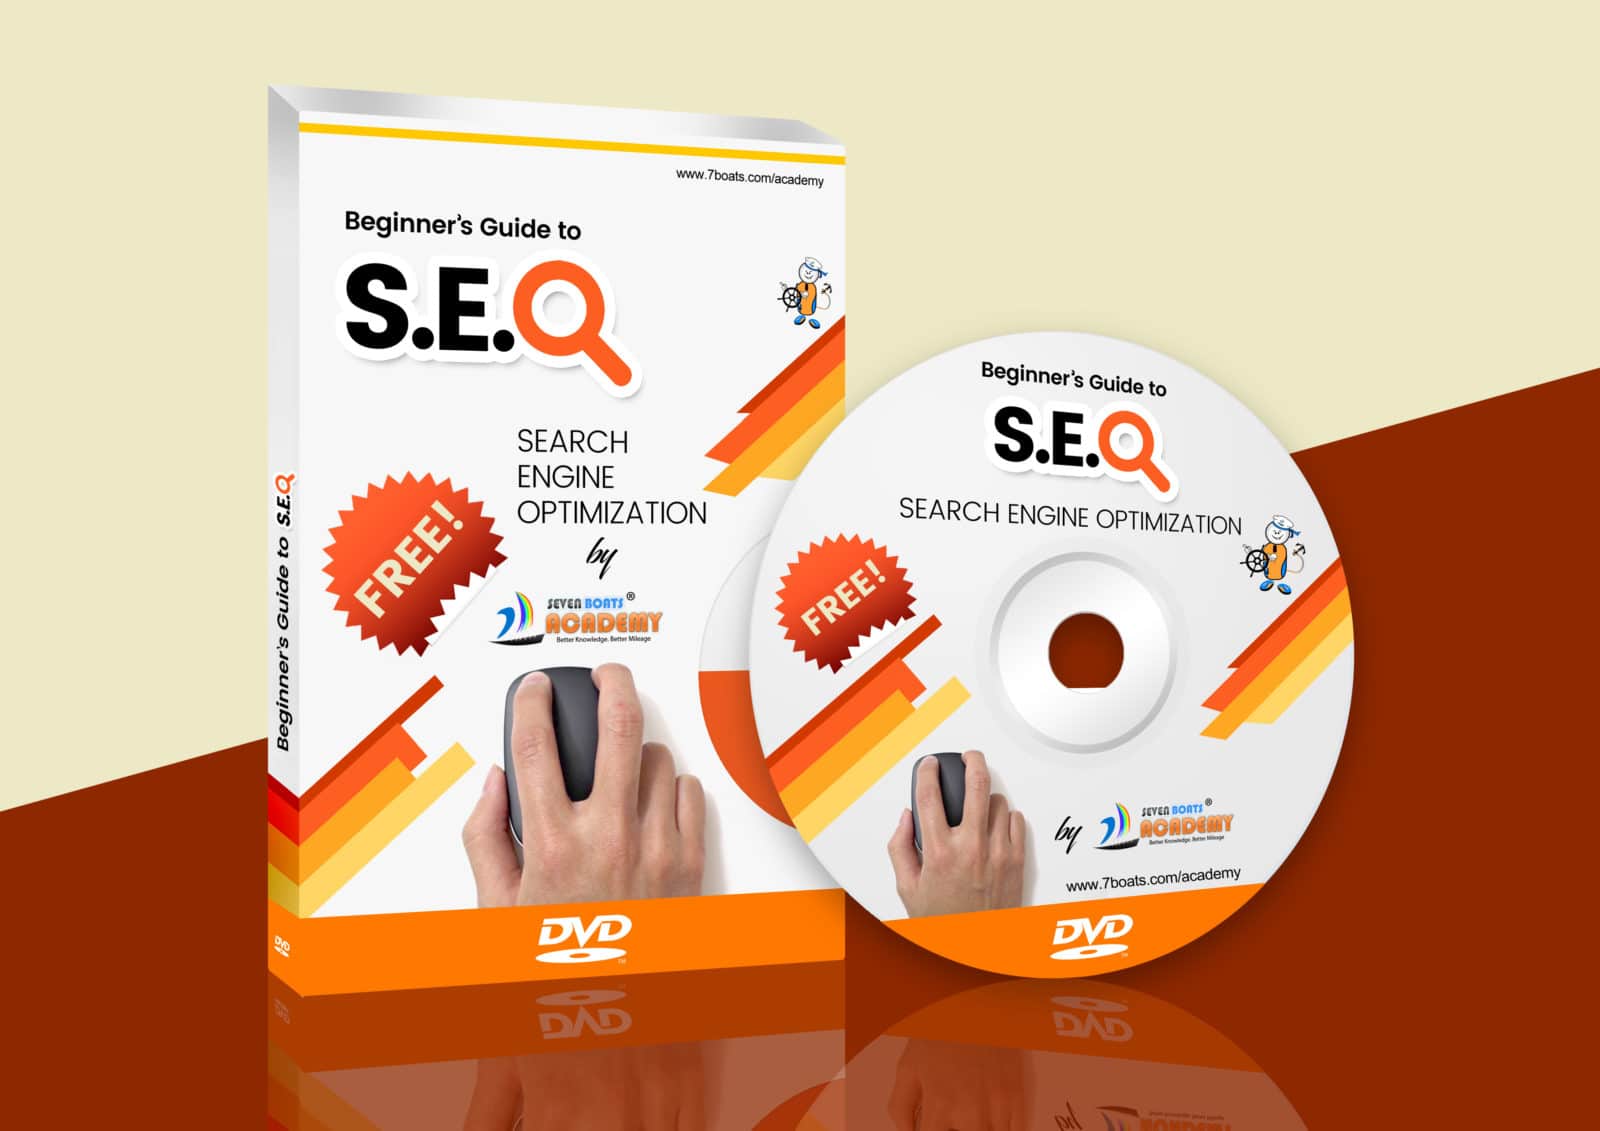 Free SEO Course 30 - New Revised 01 CD DVD Cover SEO guide